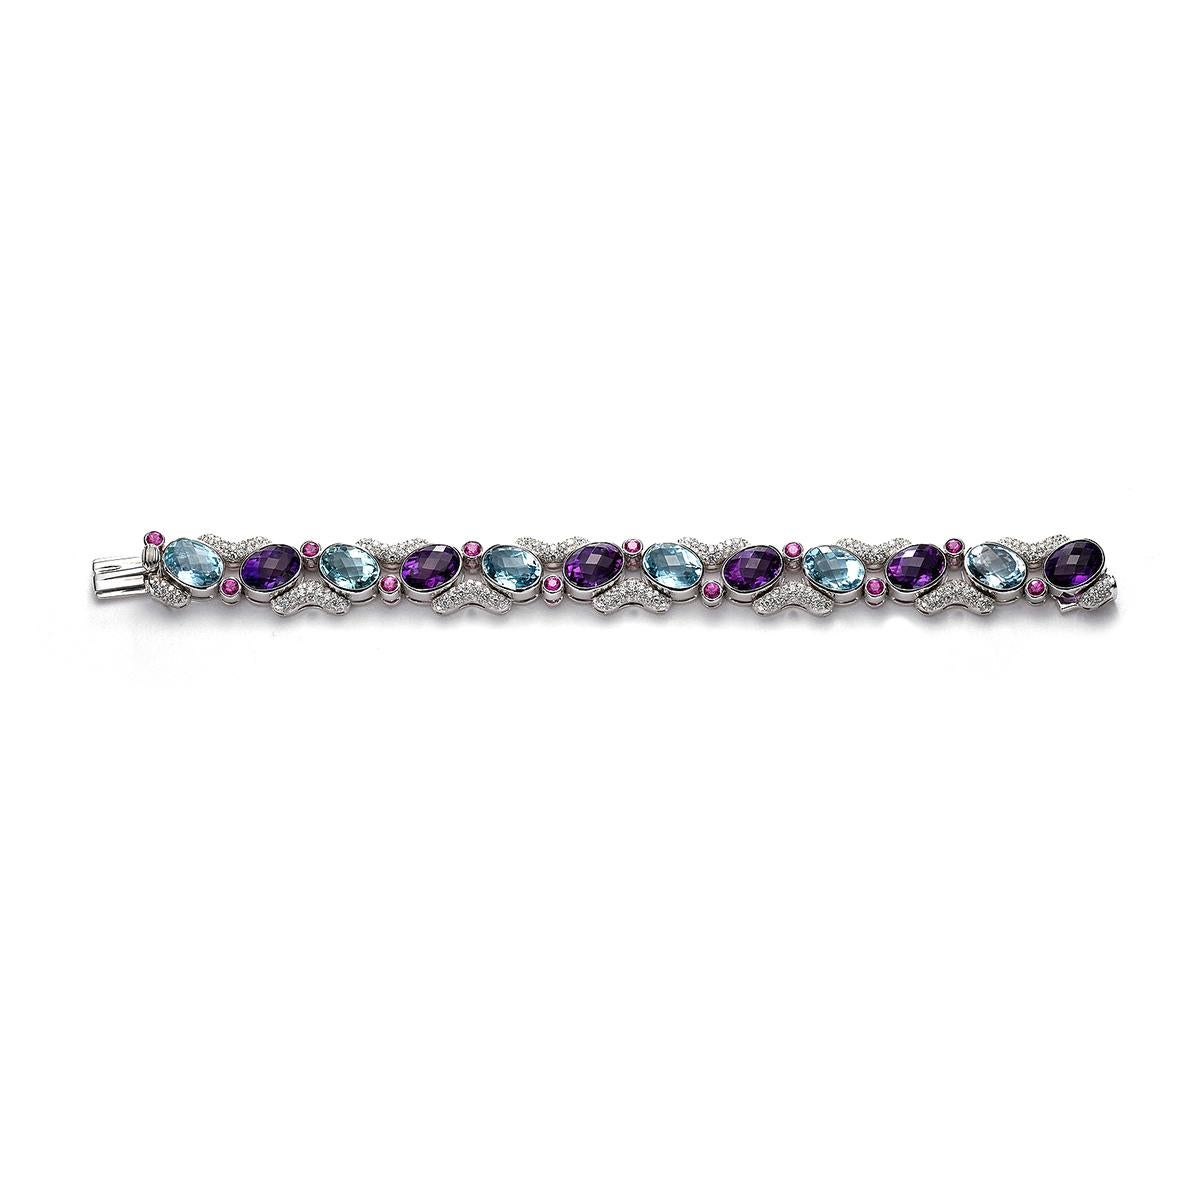 Bracelet in 18kt white gold set with 321 diamonds 3.88 cts 12 pink sapphires 1.68 cts, 6 amethysts 18.68 cts and 6 aquamarines 13.63 cts      